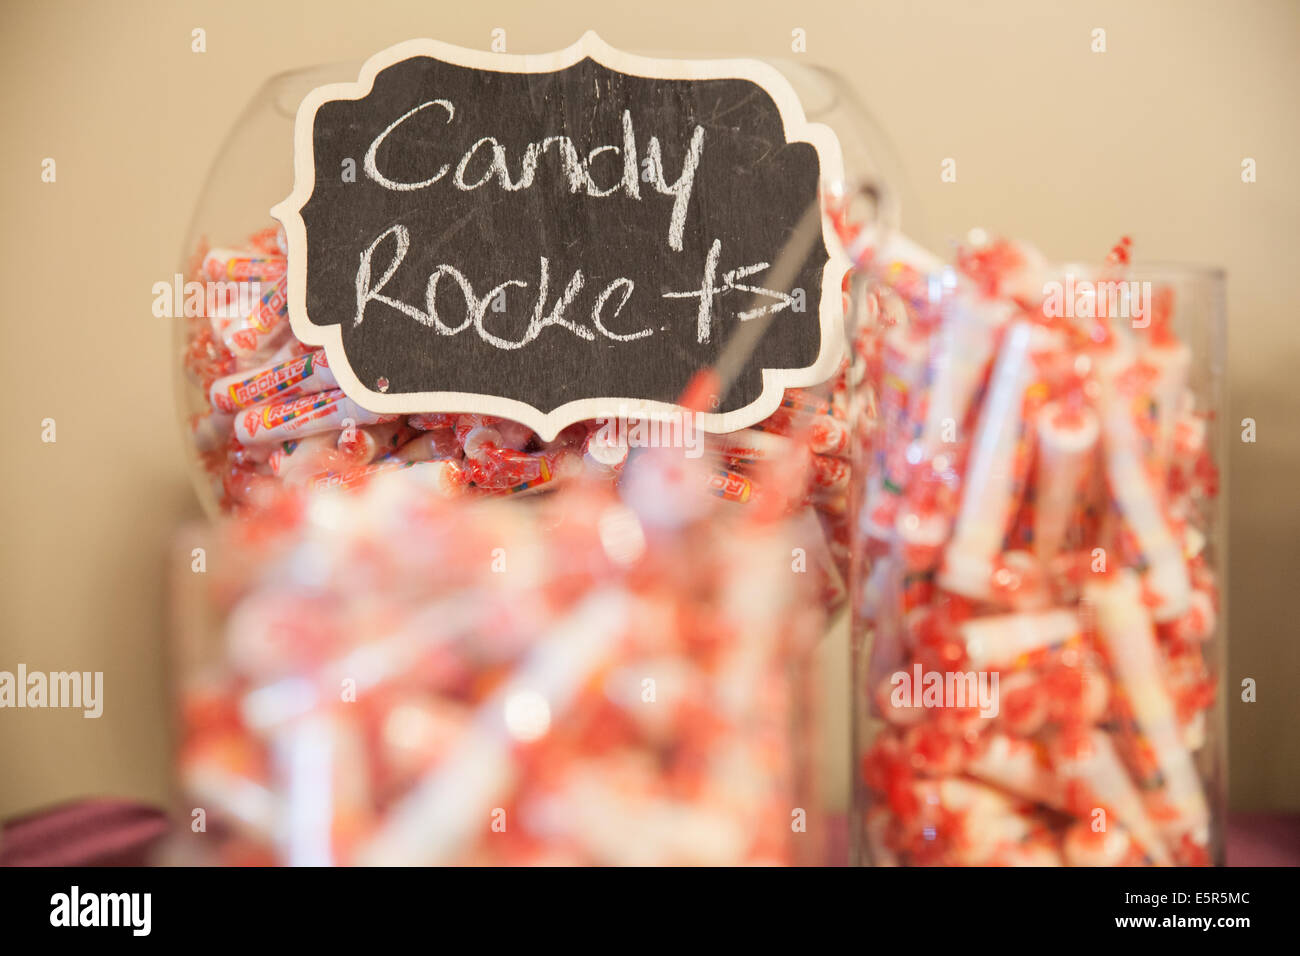 candy rockets sweet desert table Stock Photo